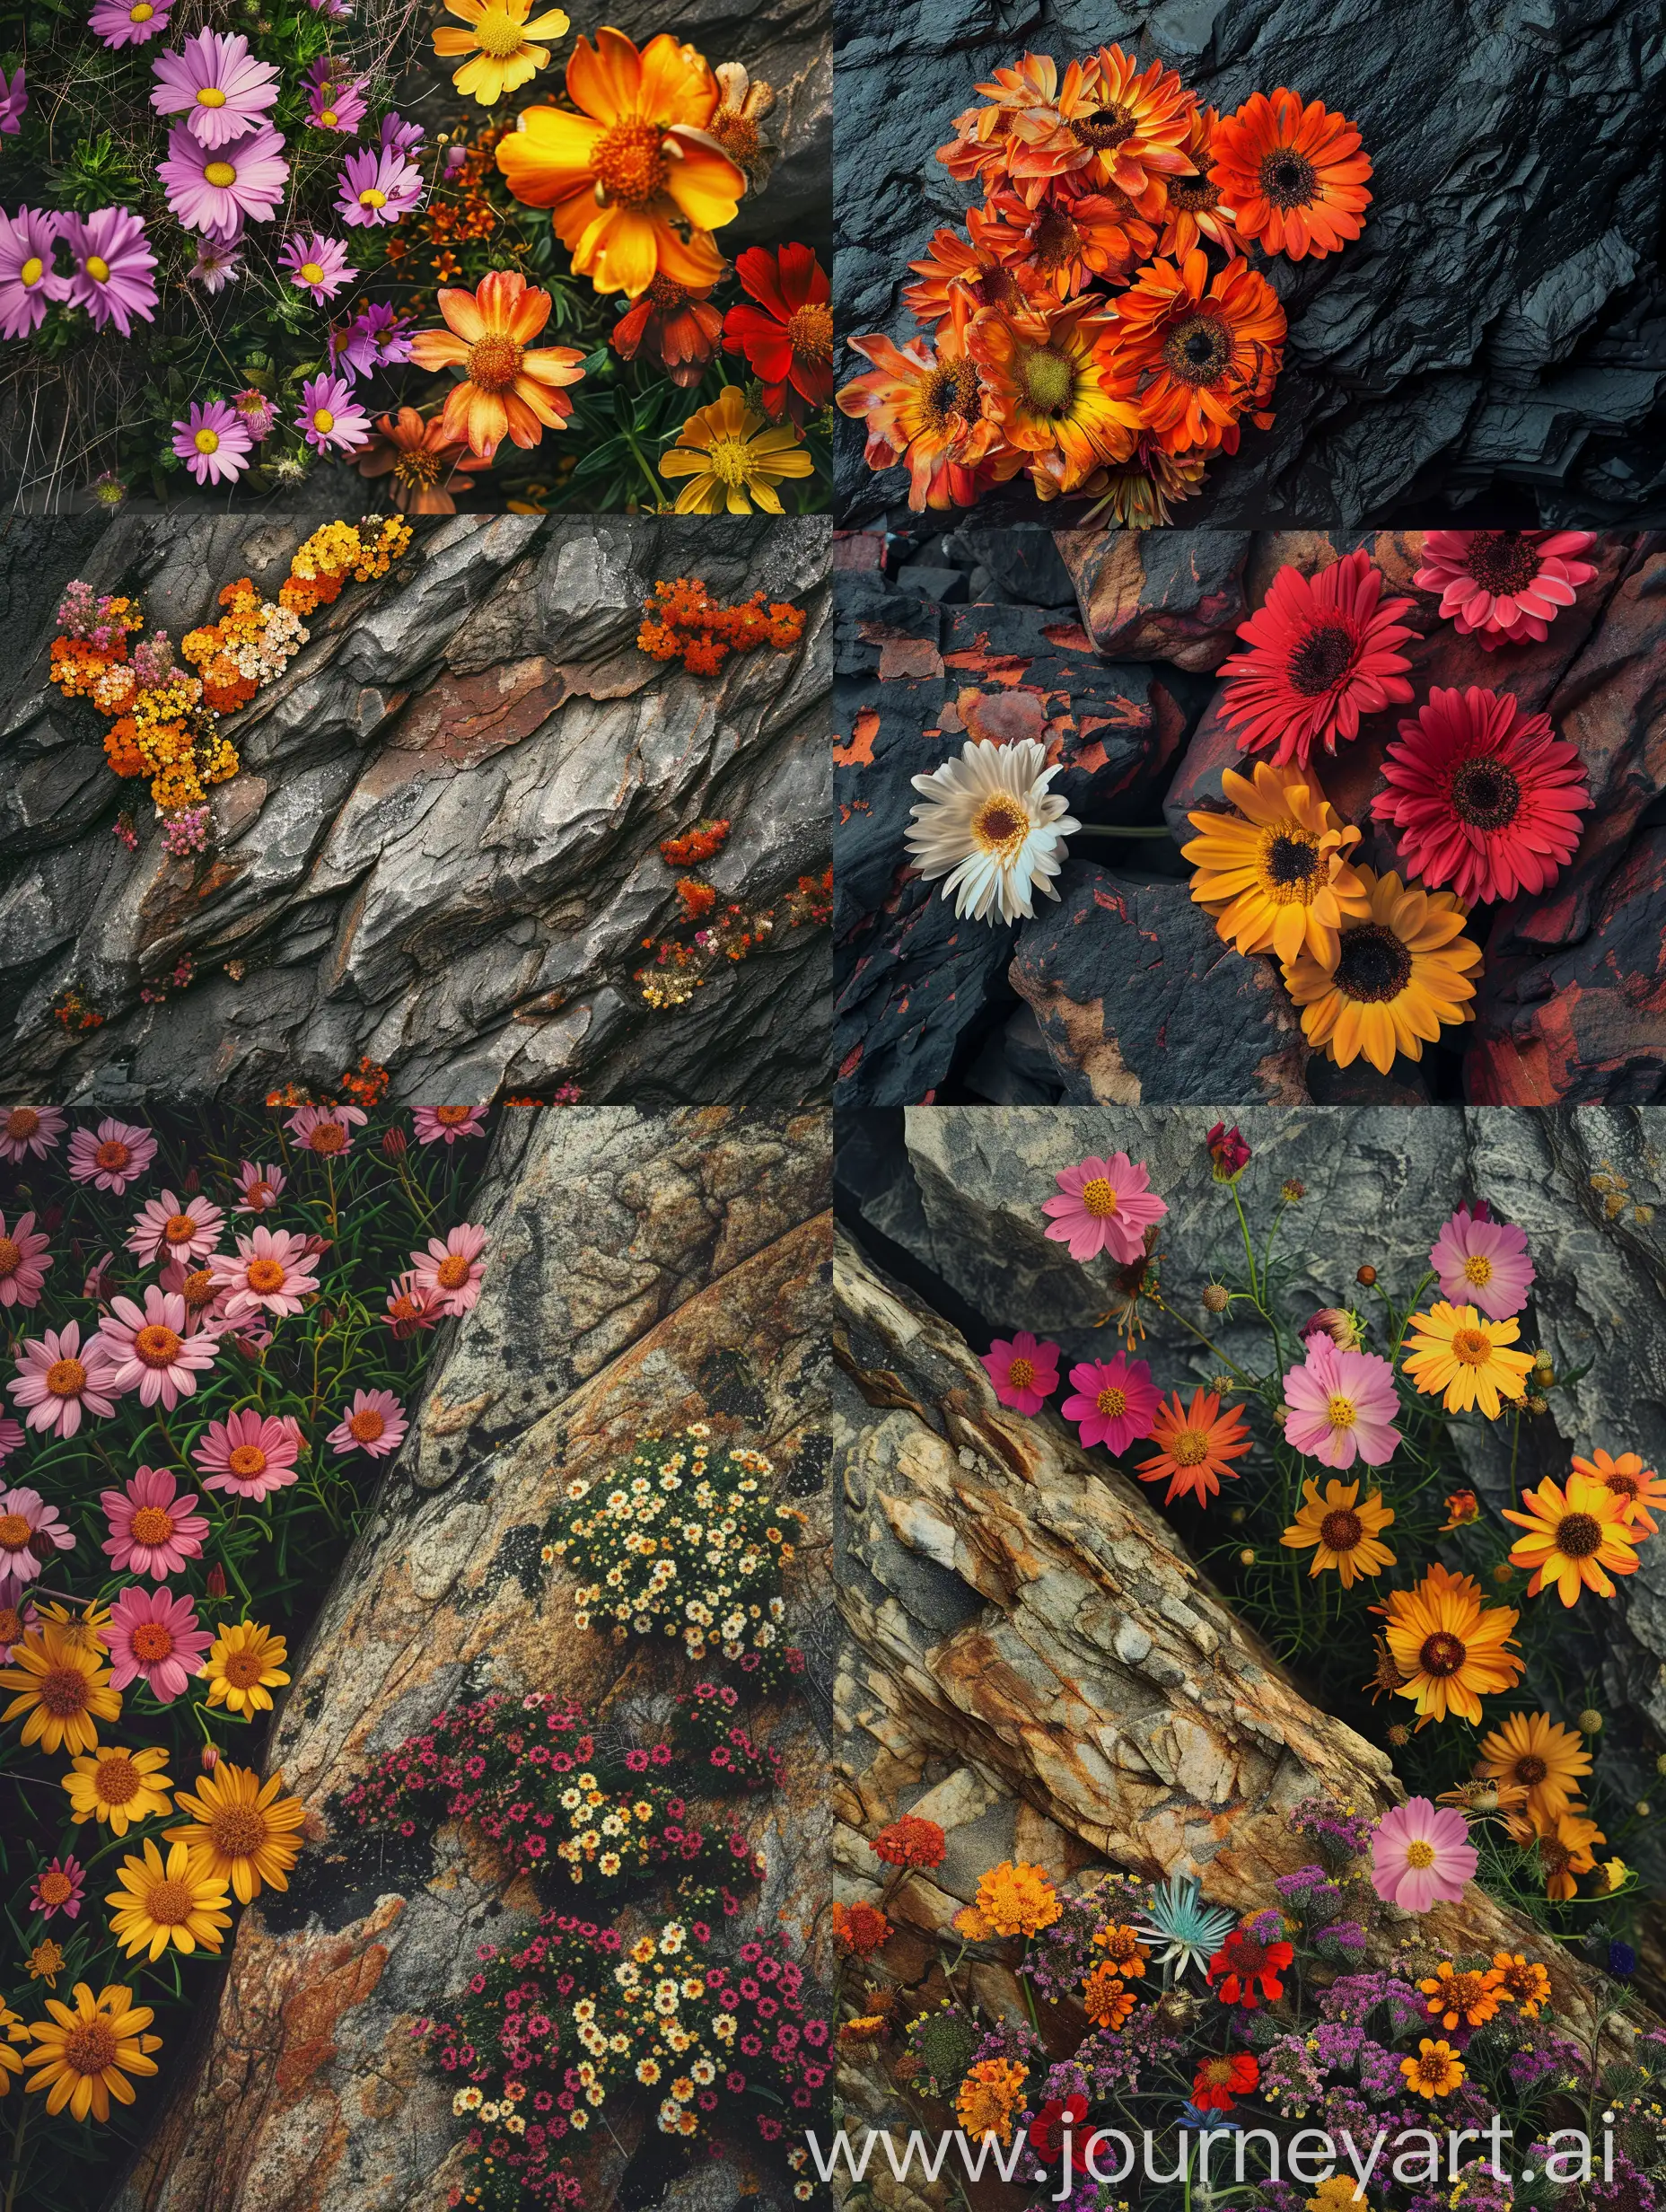 Image 1: Flowers - Rock, is made up of two images, I imagine the top half of the portrait image will be Flowers and the bottom half will be a Rock, vibrant flowers, rugged rock, DSLR camera, 85mm lens, color film, HDR processing